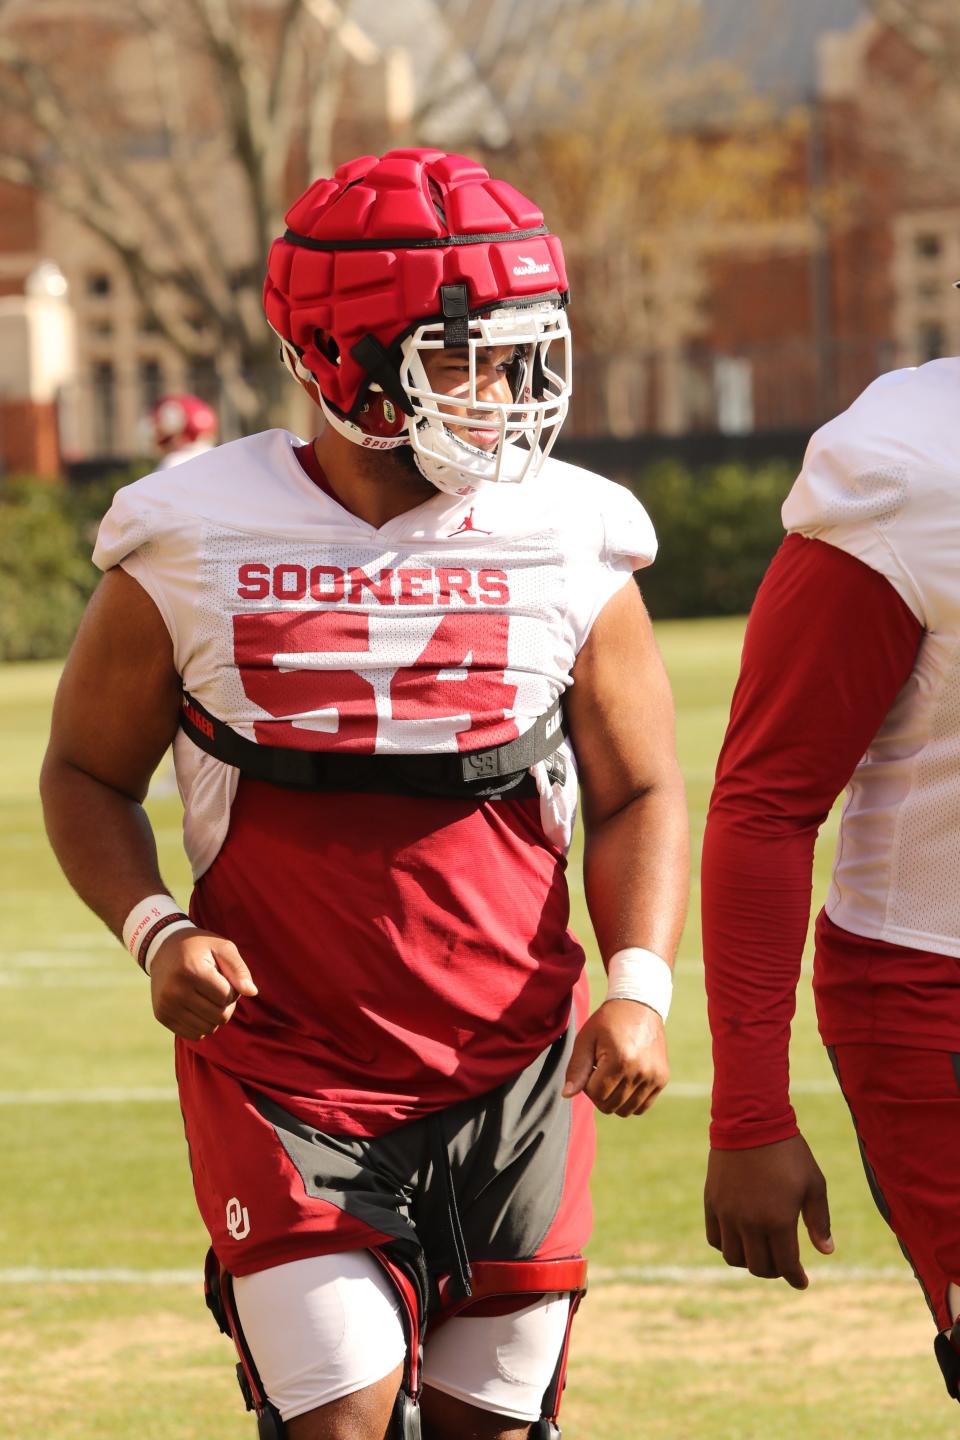 Defensive lineman Jacob Lacey goes through drills as the University of Oklahoma Sooners (OU) college football team holds spring practice outside of Gaylord Family/Oklahoma Memorial Stadium on  March 21, 2023 in Norman, Okla.  [Steve Sisney/For The Oklahoman]